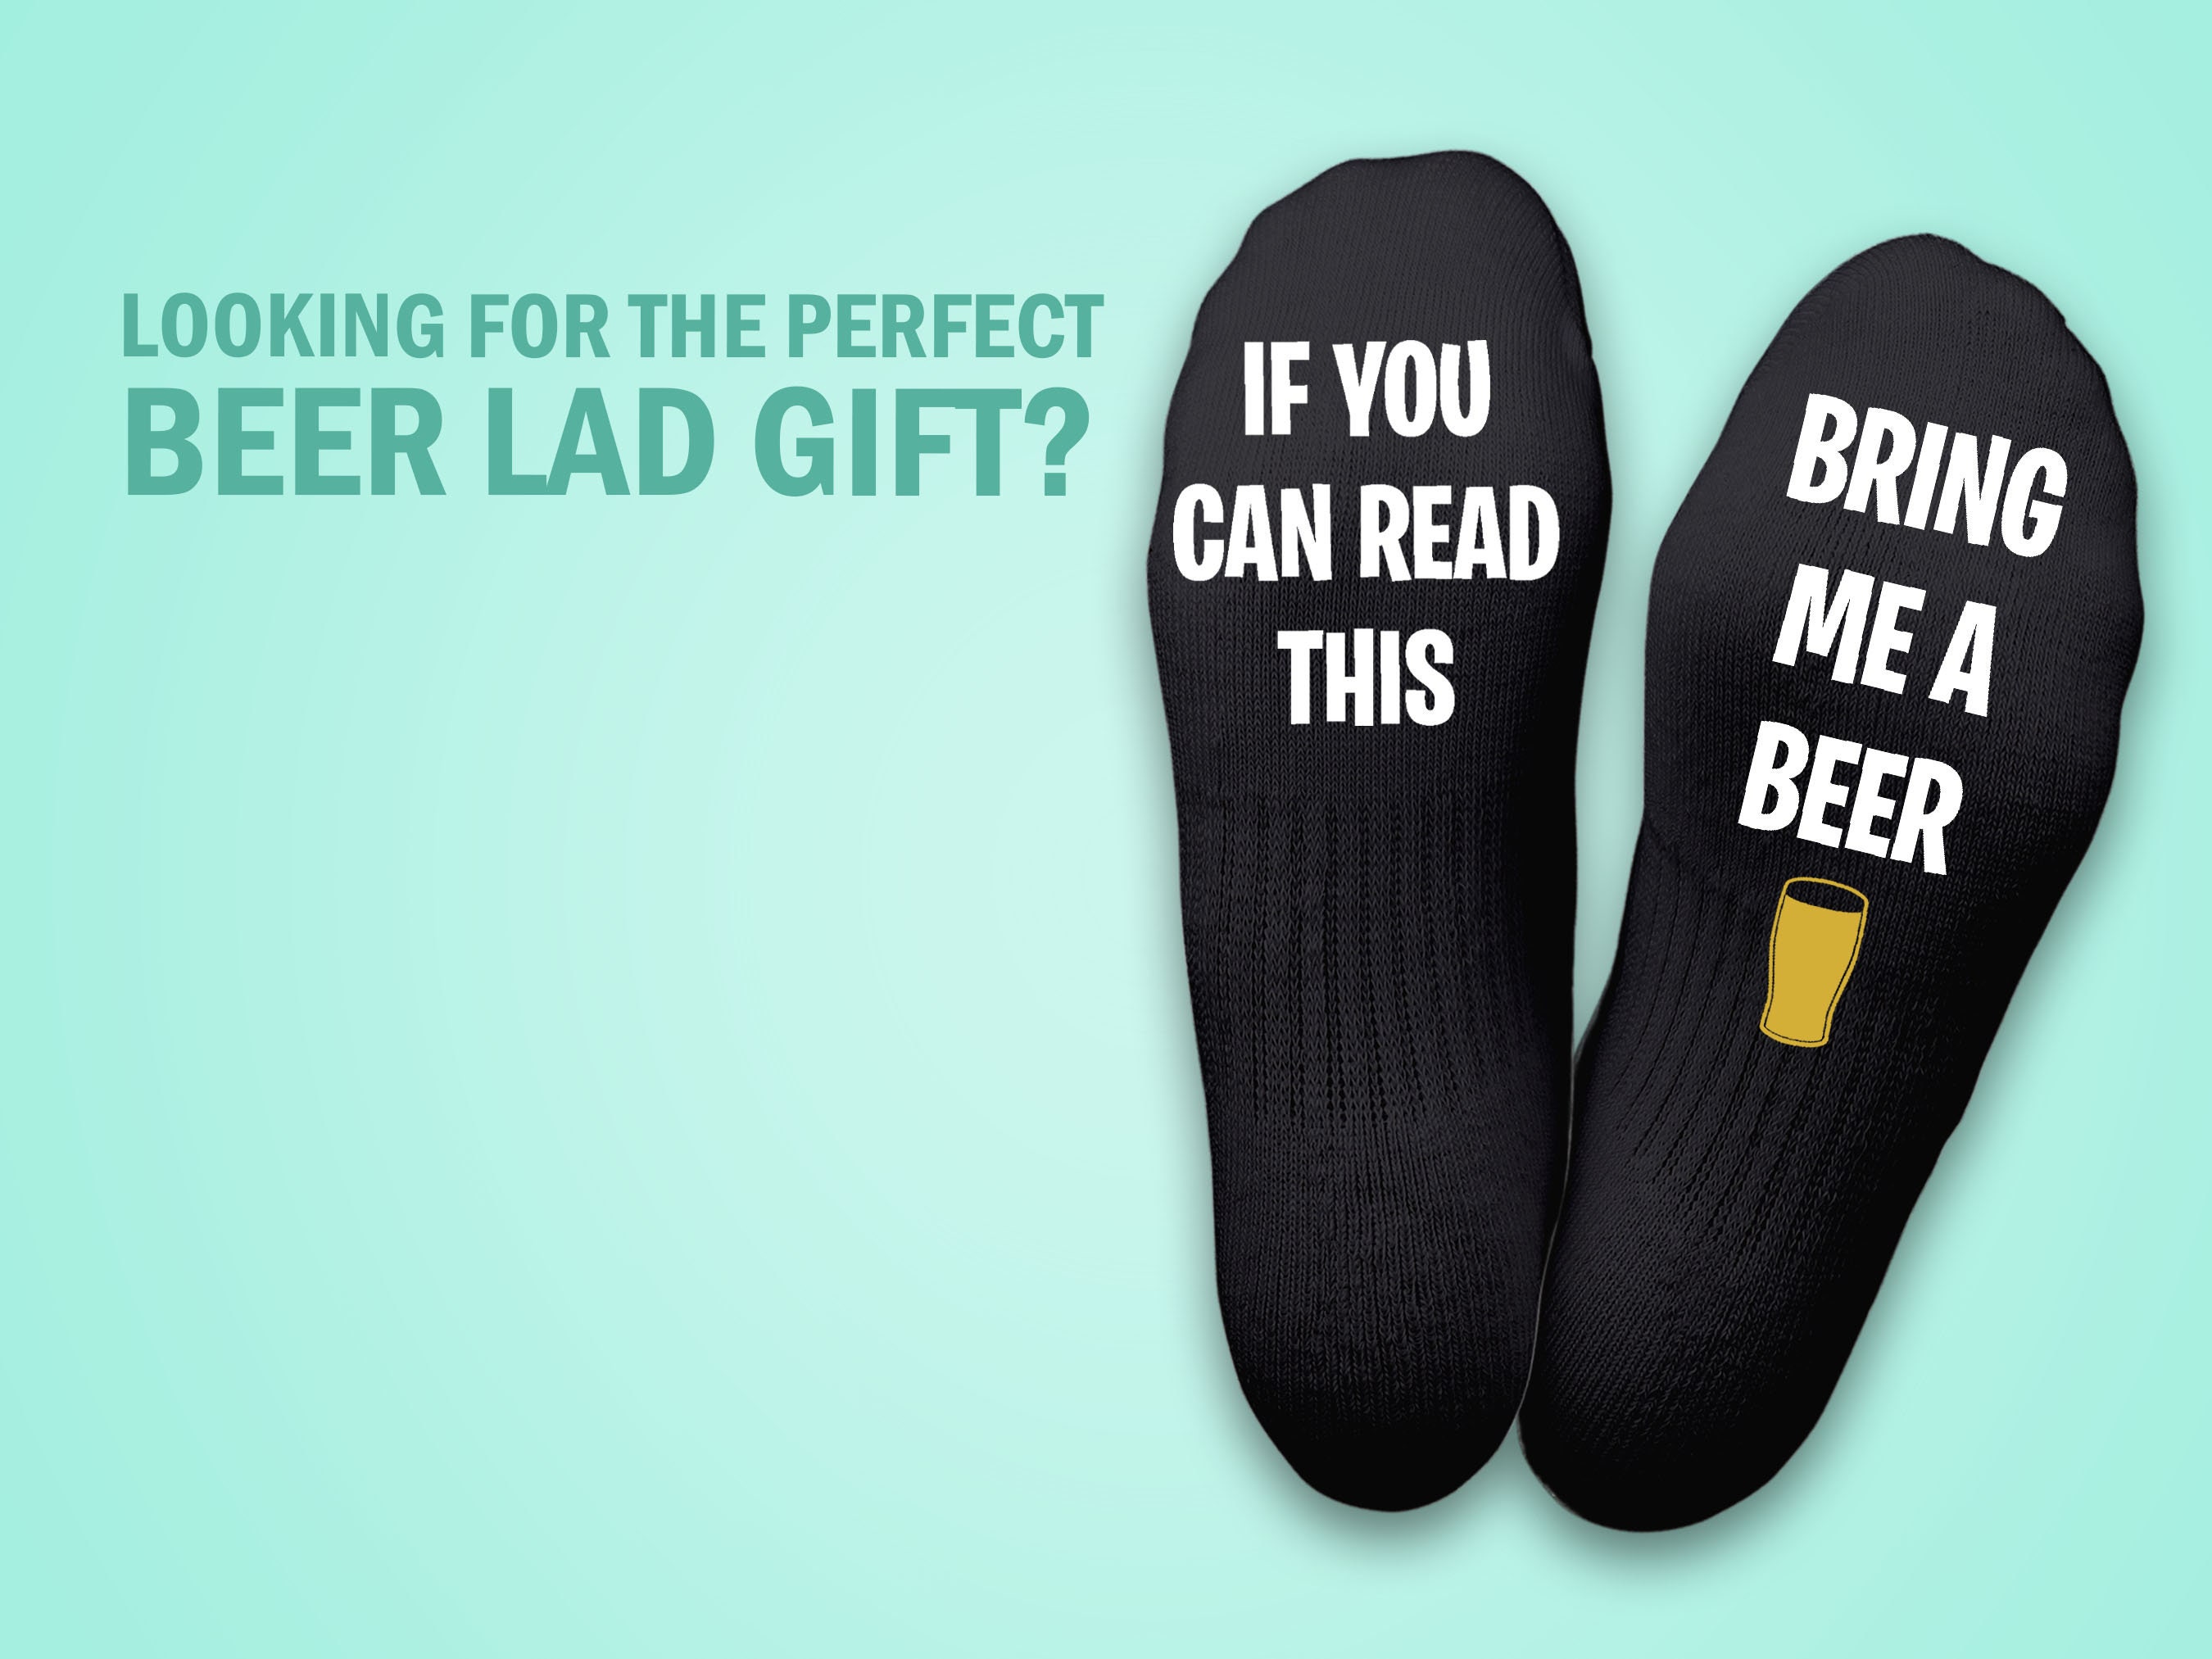 Beer Gifts for Women Gift for Beer Lover Gift for Beer Drinker Gift for Her  Bring Me a Beer Socks Gifts for Her Sorority Gift for Graduation 